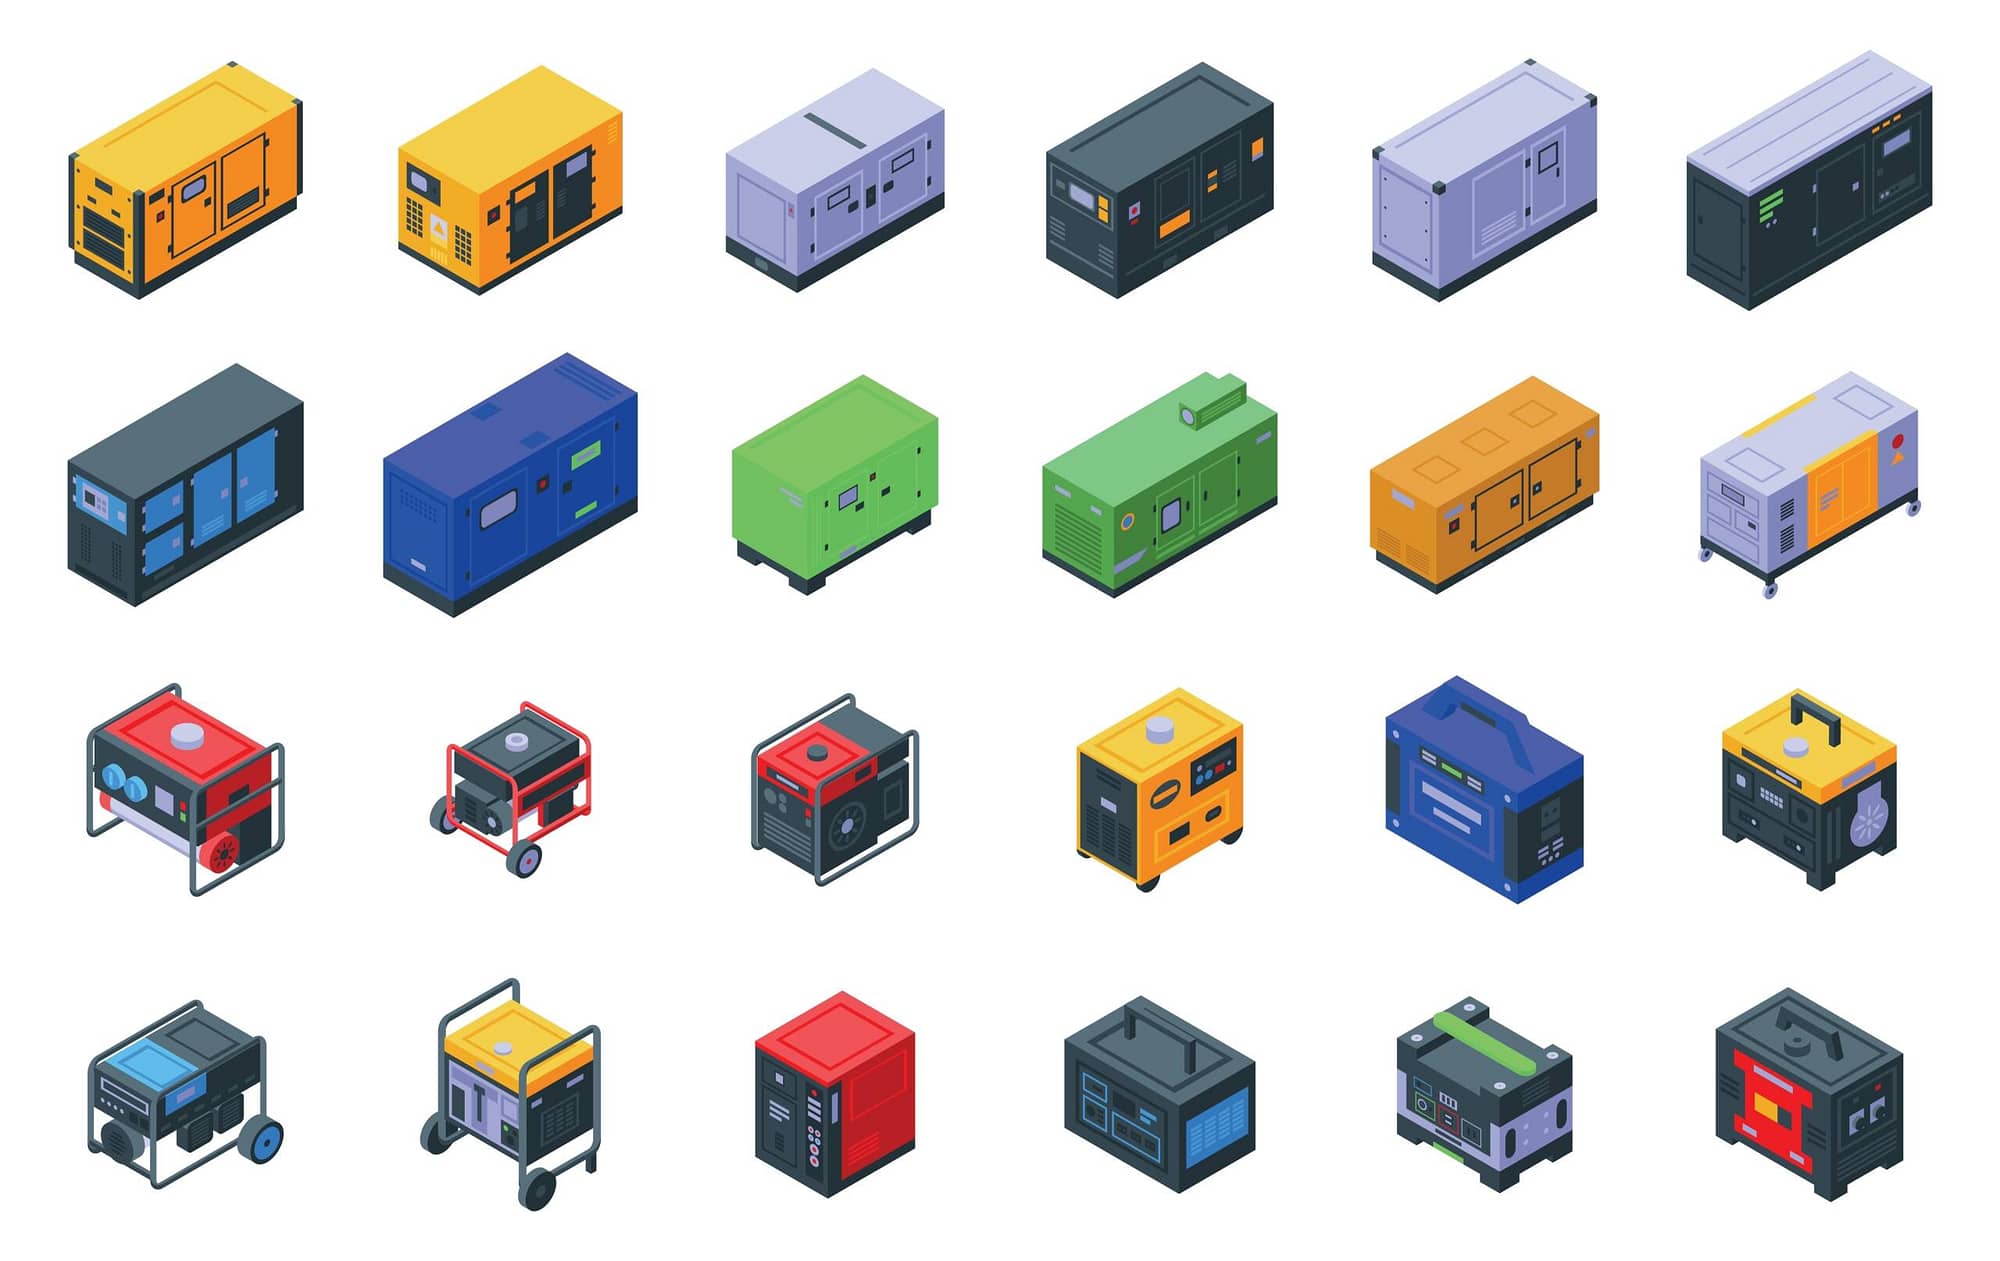 An illustration of various commercial generators, based on size and output.